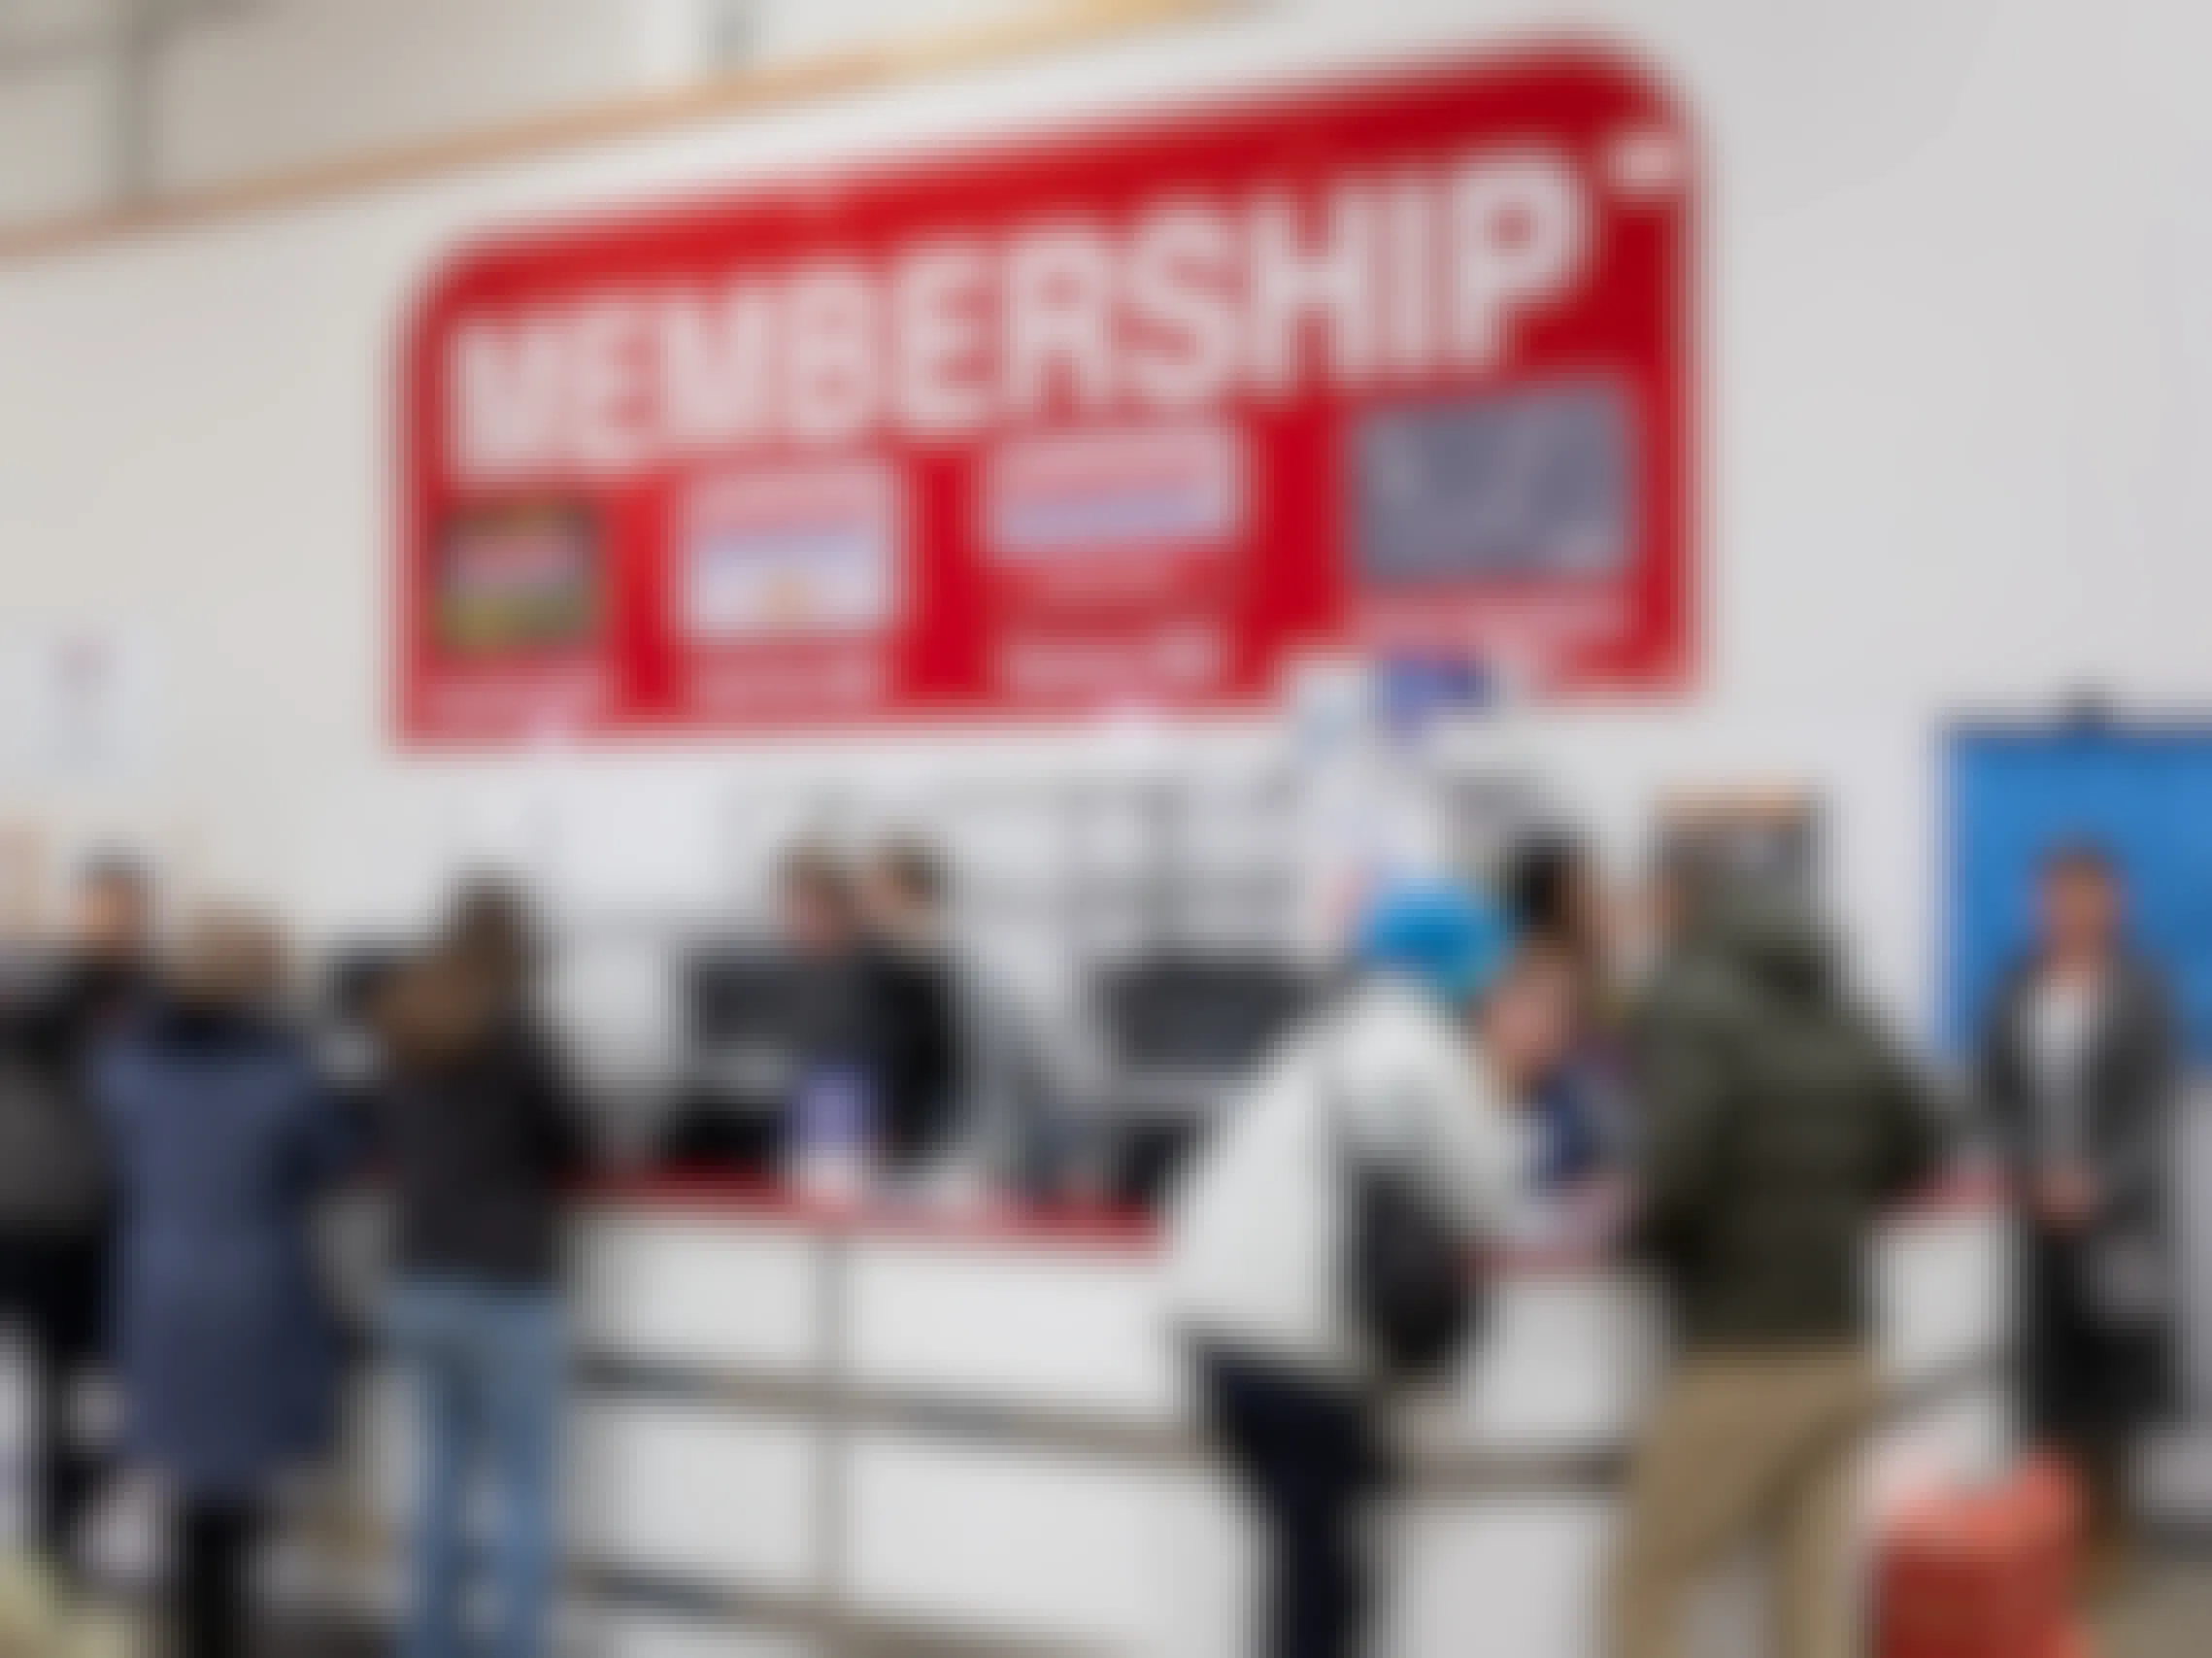 Costco customers standing at the Membership counter with a large sign listing the membership prices.